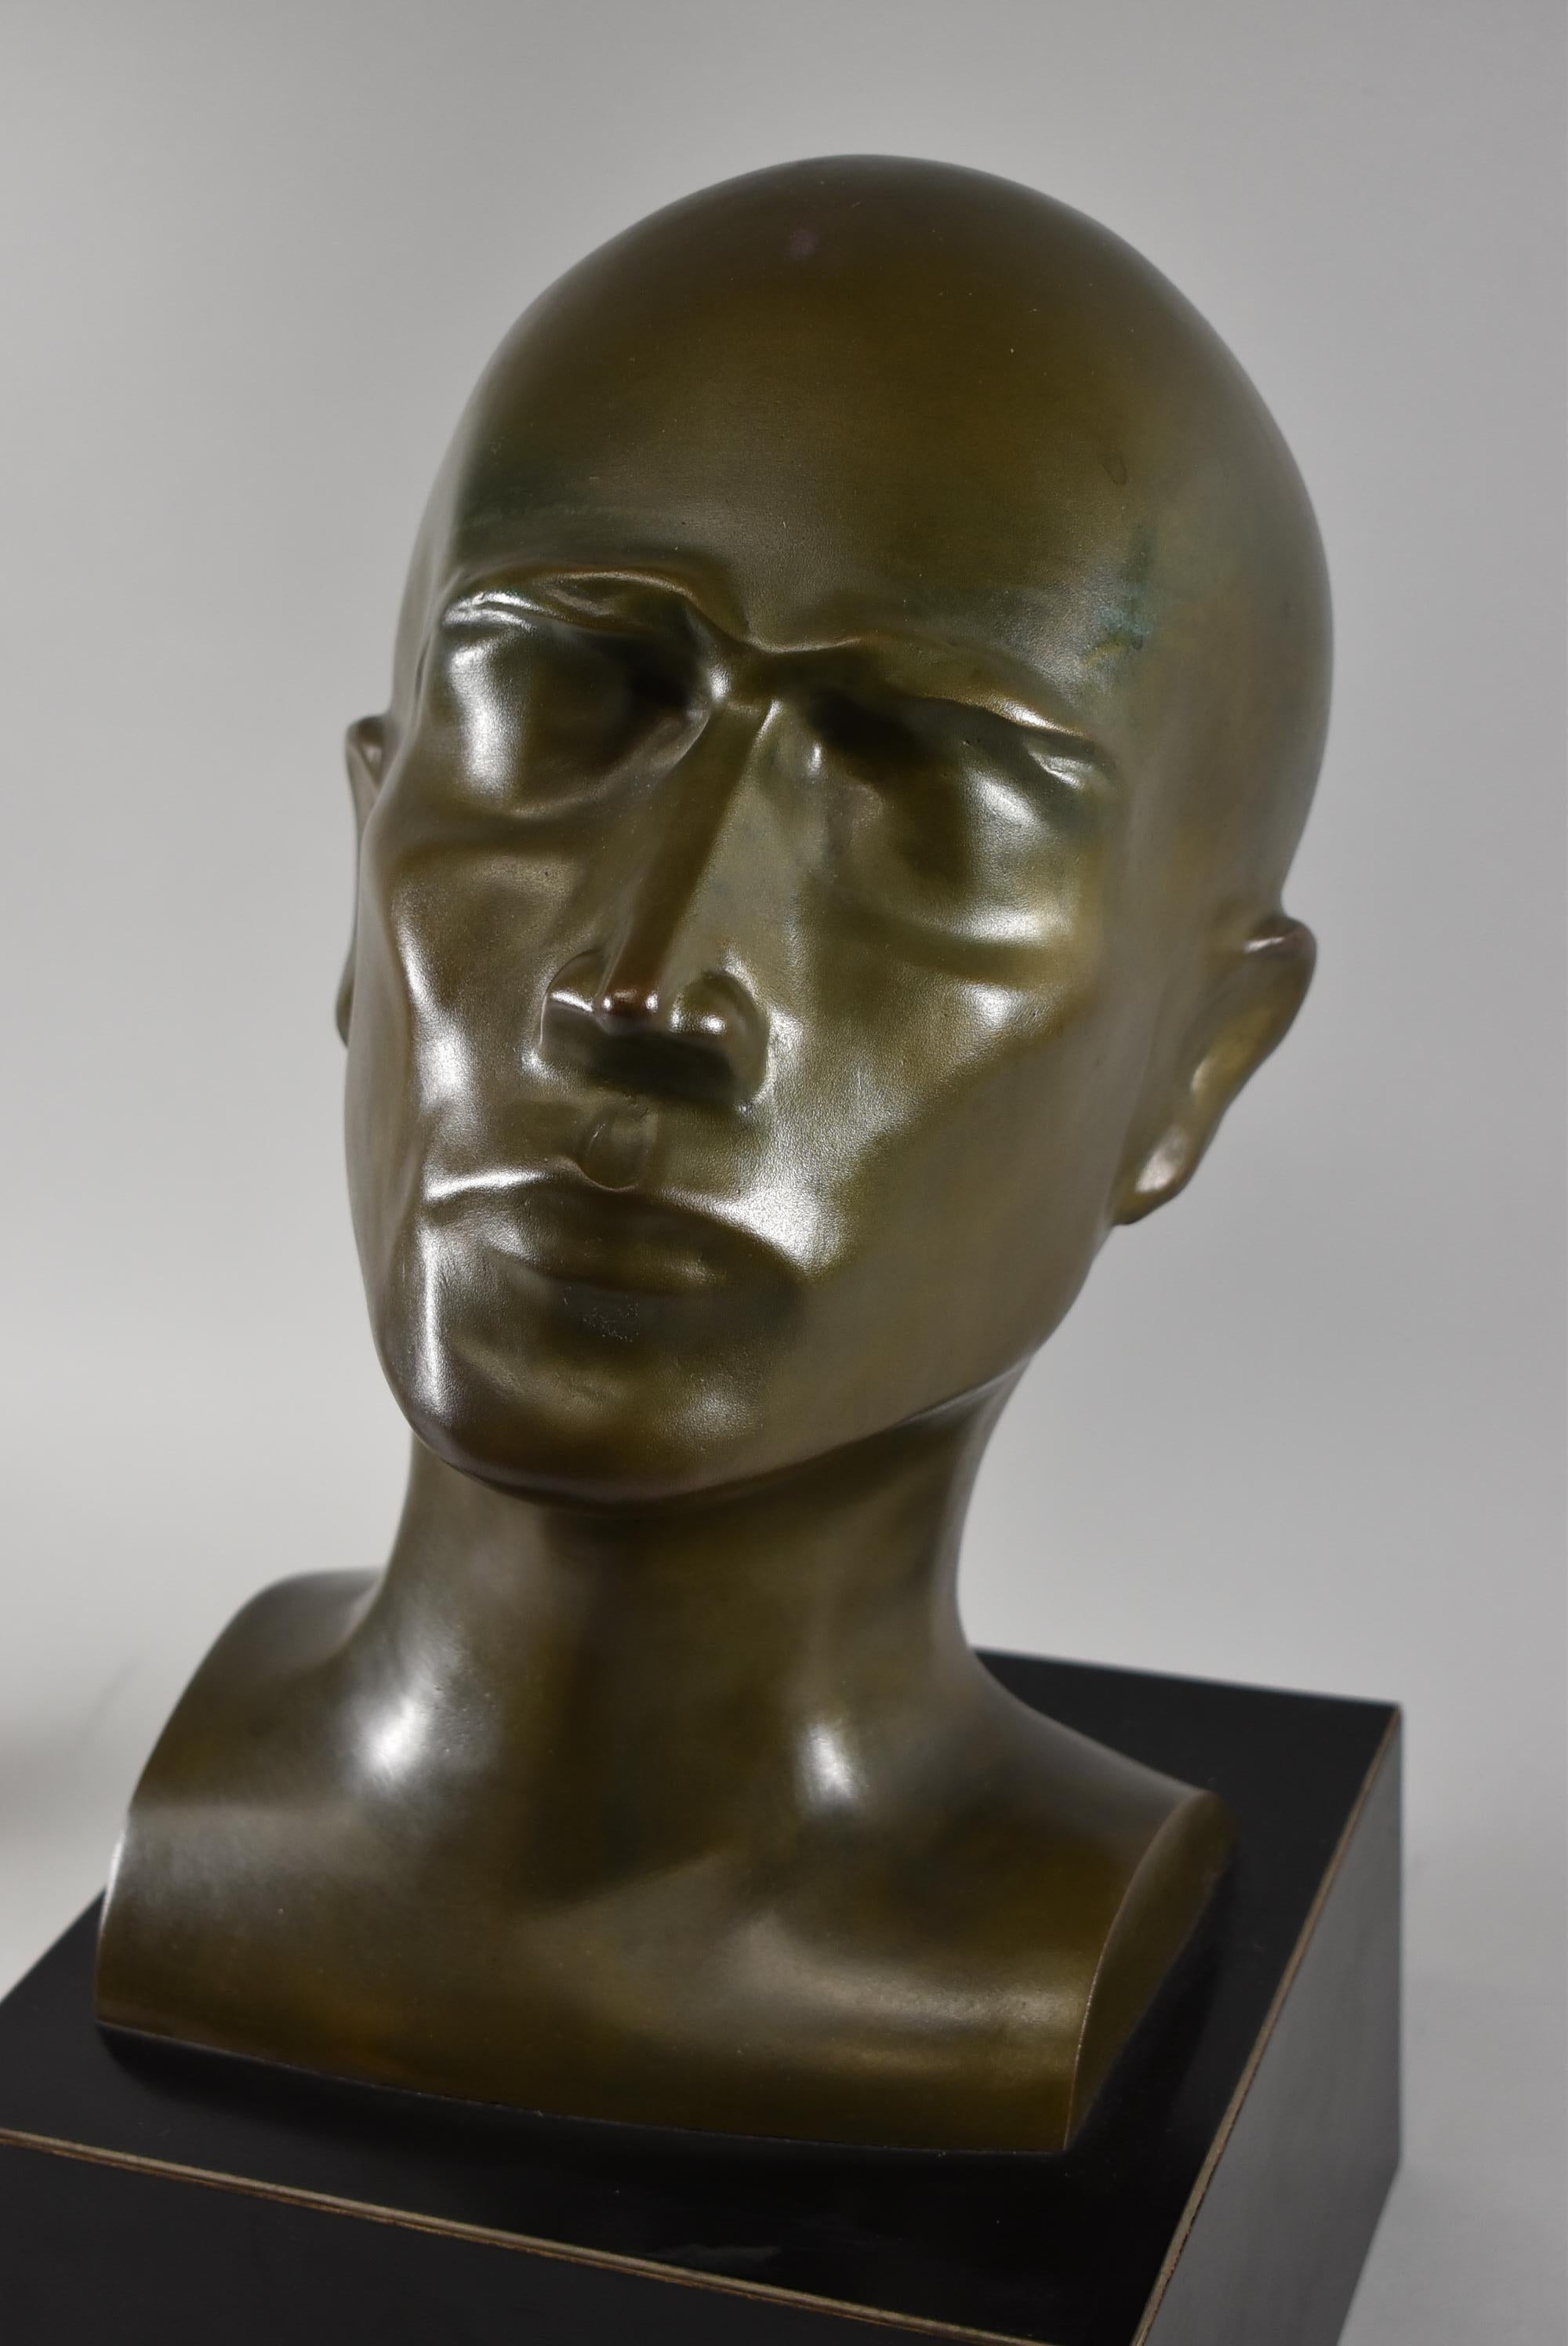 Modern art bronze male bust sculpture. Laminate base. Very nice condition. Dimensions: 8